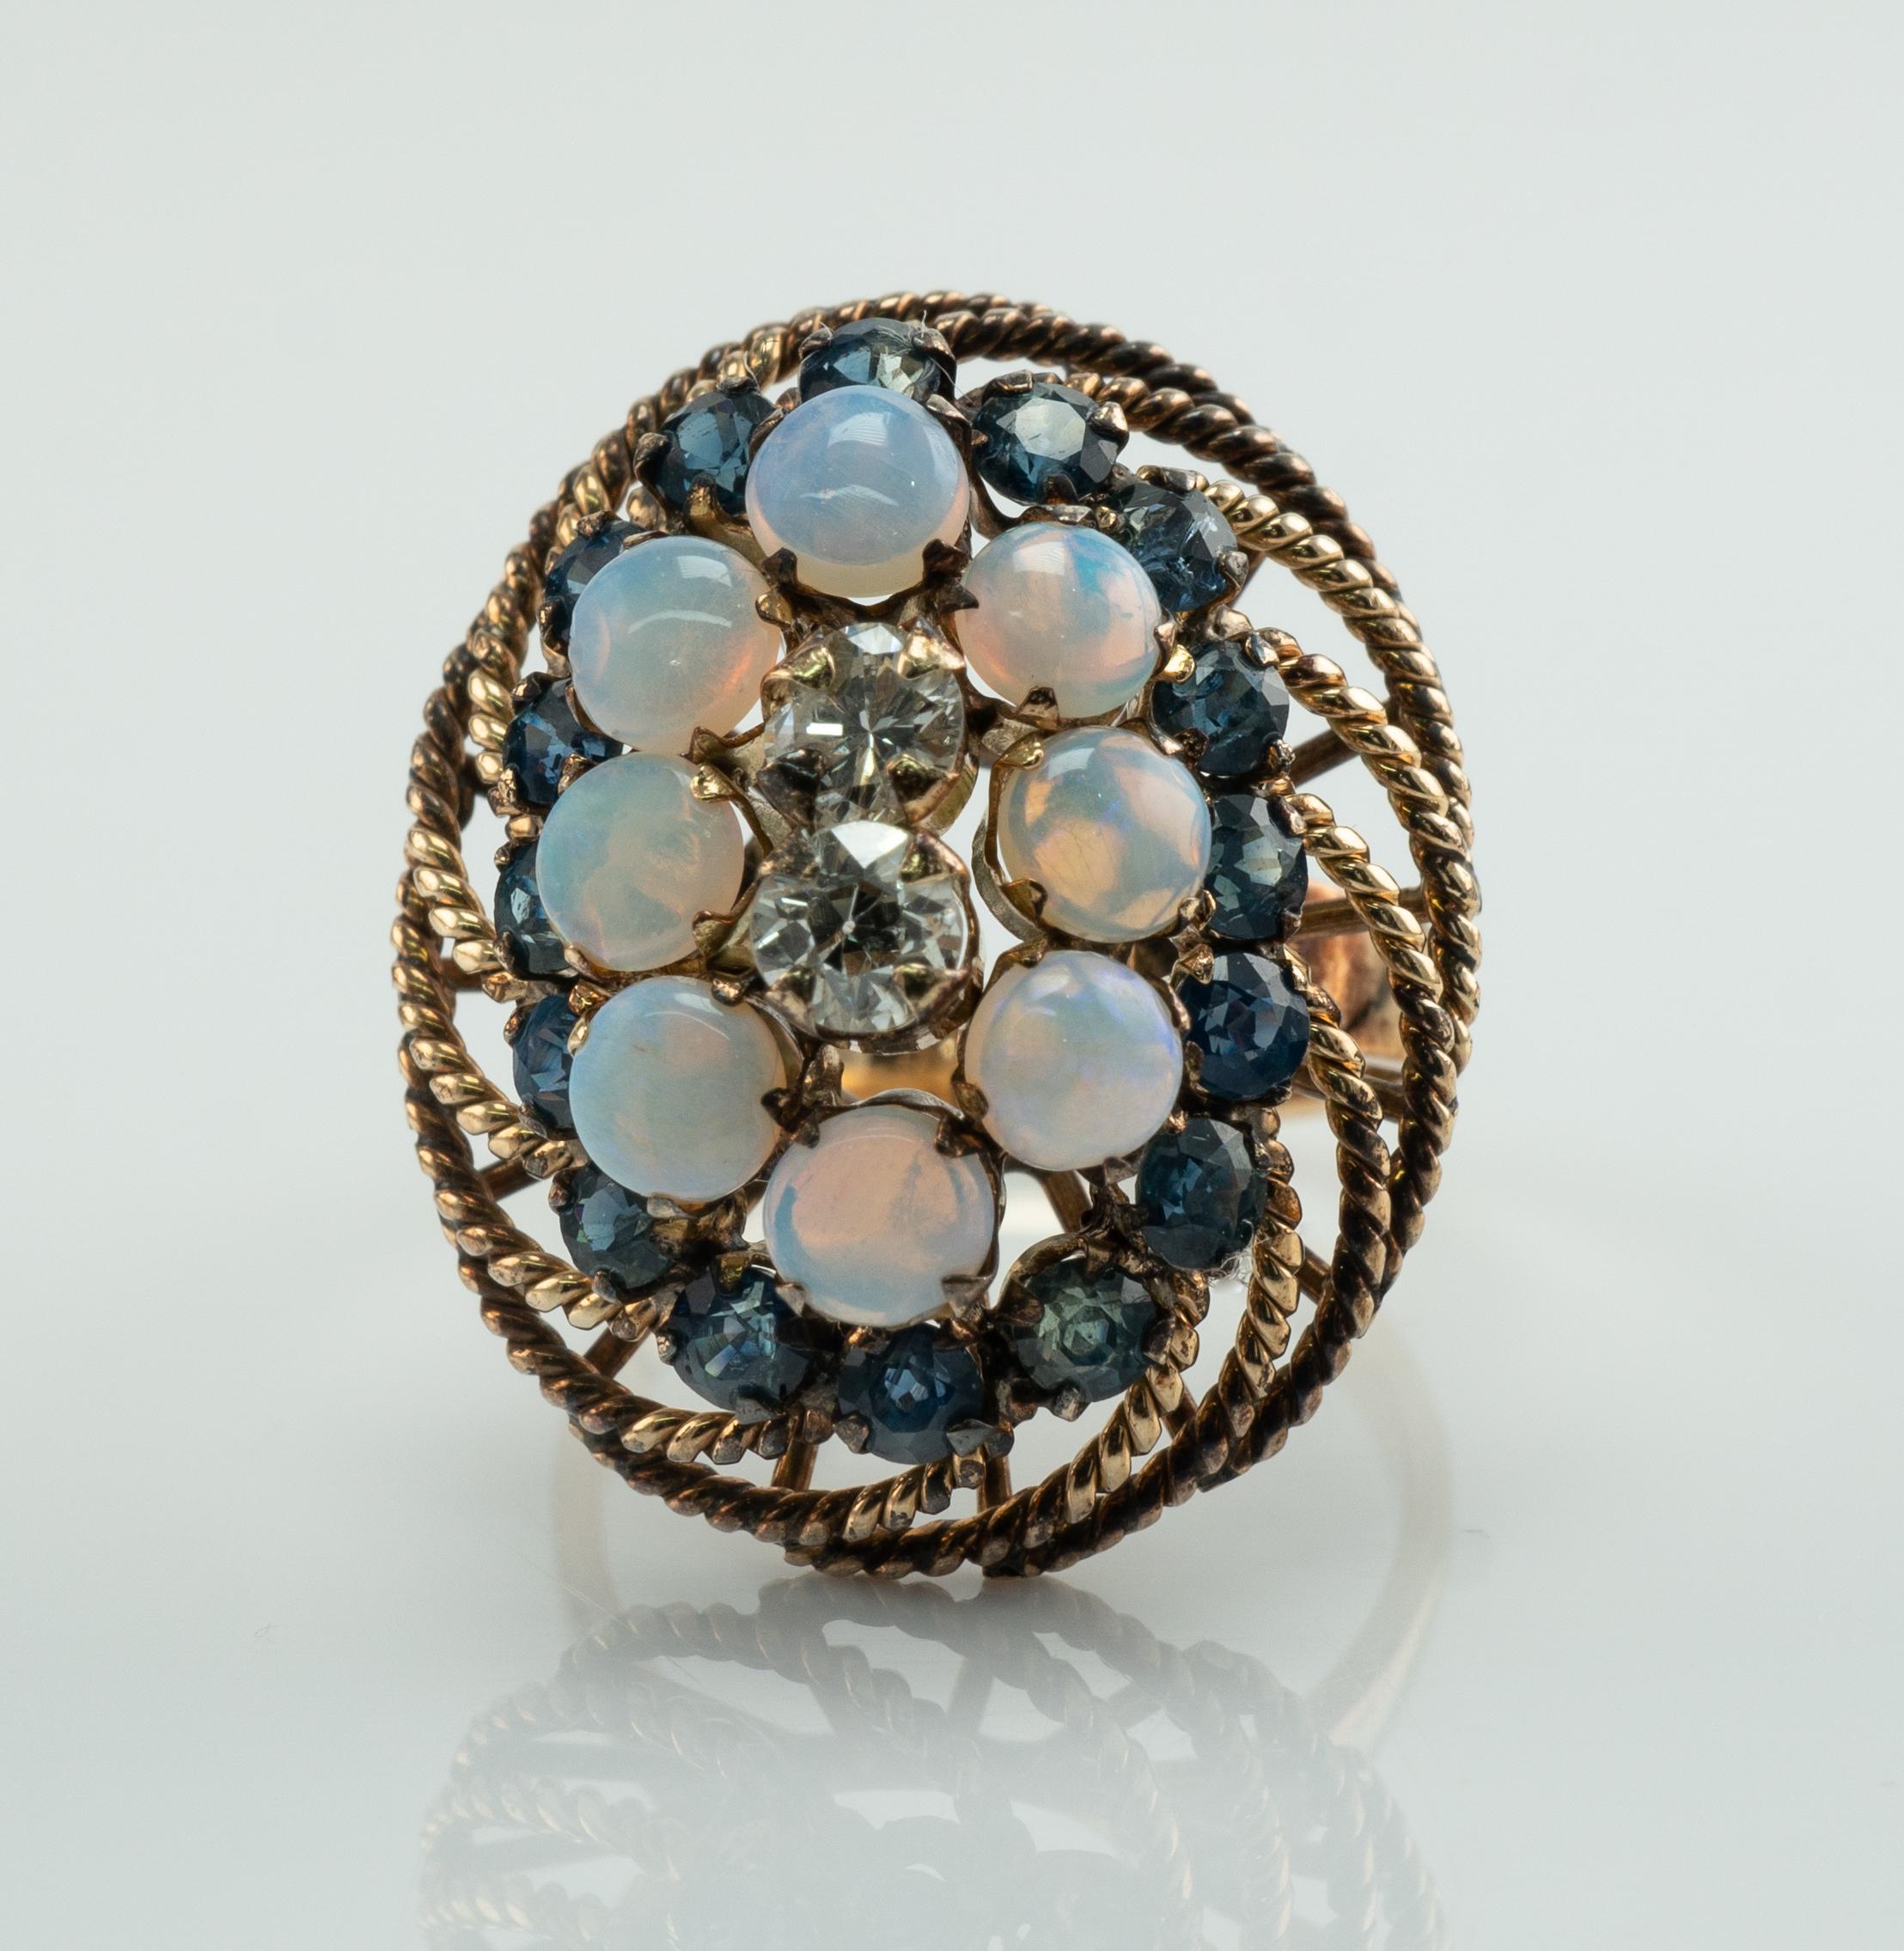 Natural Opal Sapphire Diamonds 14K Gold Ring Cocktail Vintage

This beautiful large vintage ring is finely crafted in solid 14K Yellow gold and set with genuine Earth mined Opals, Sapphires, and Diamonds. 
Circa 1950s.
There are two diamonds in the